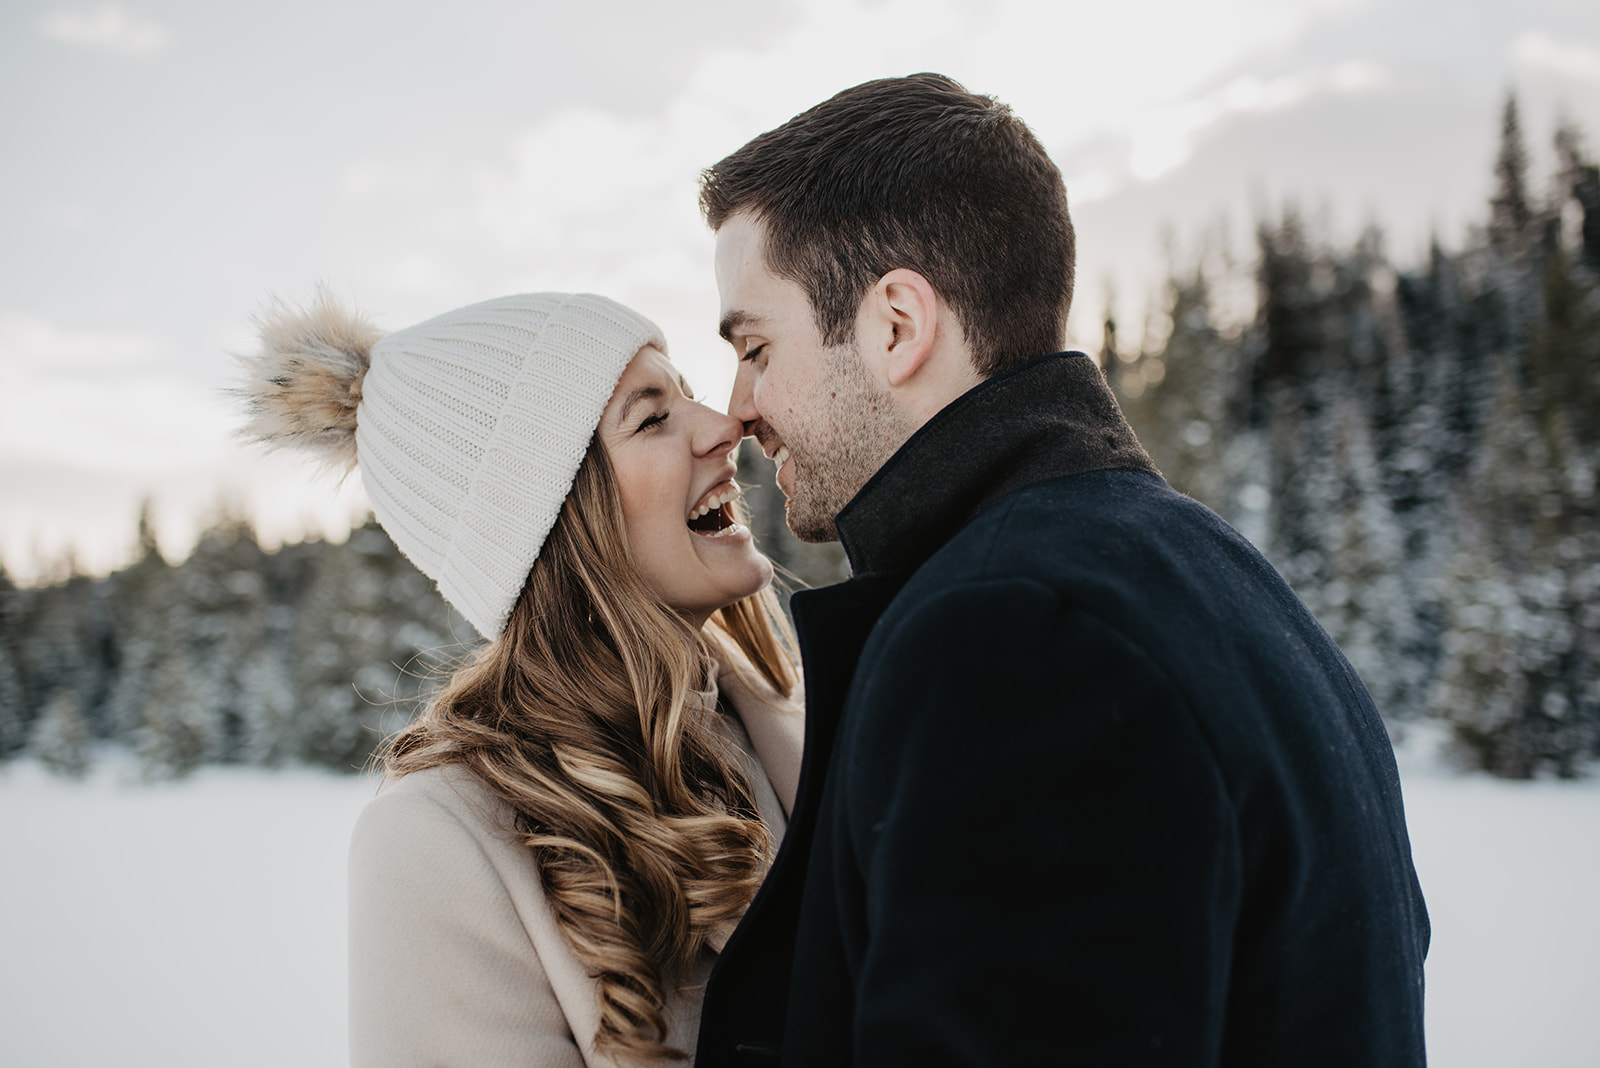 winter engagement session in Jackson Hole with man and woman laughing while they hold each other in fron tof pine tress and snow covered ground